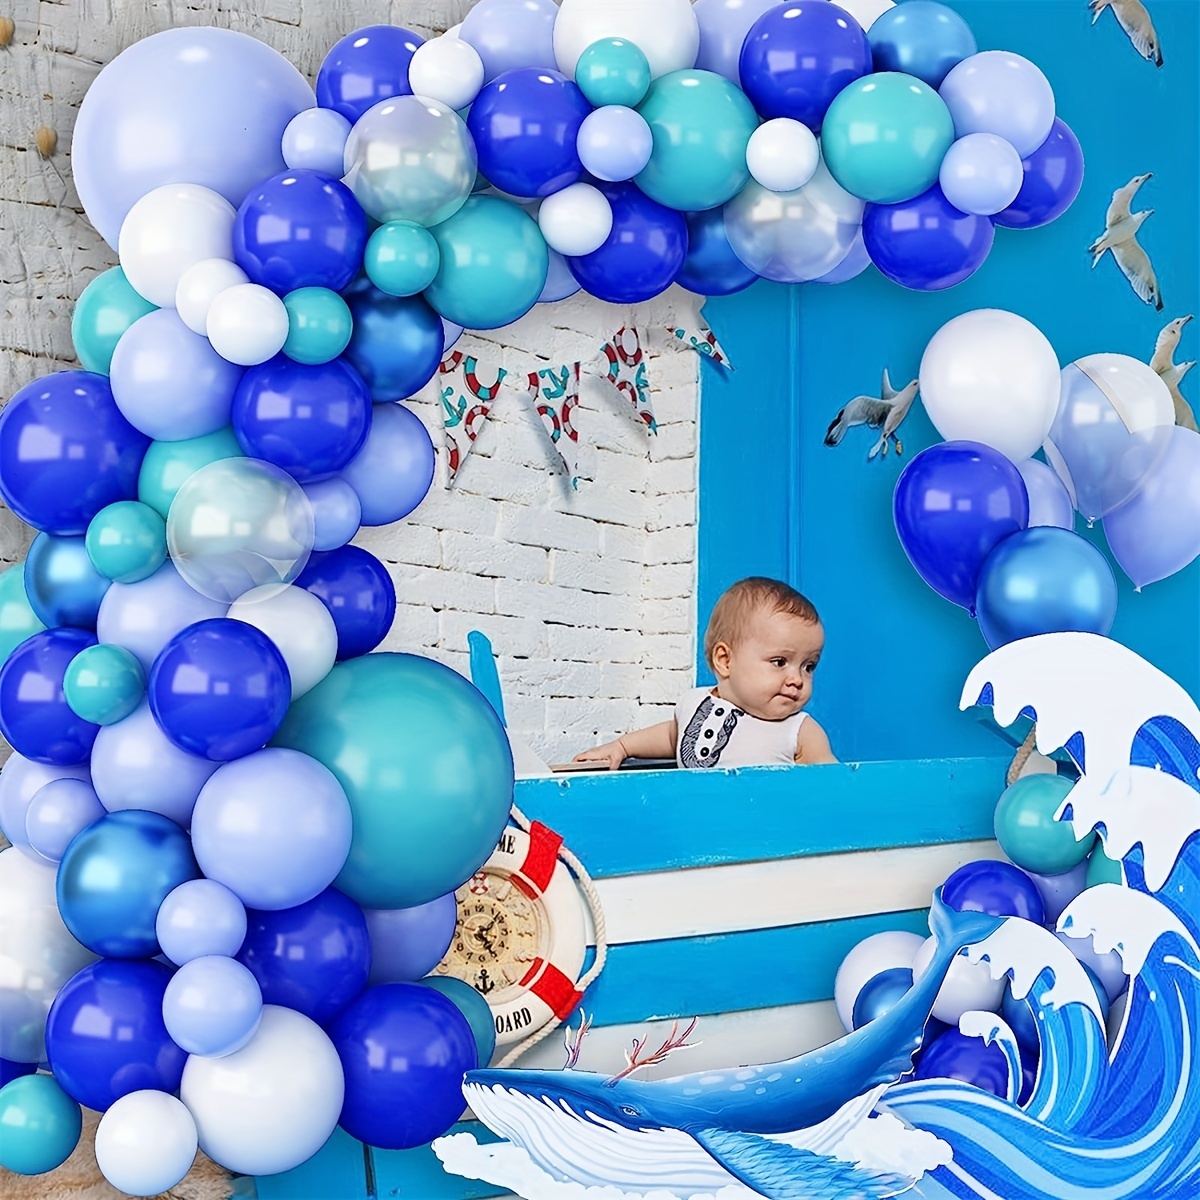 127pcs Ocean Themed Party Decorations Set Including Balloons, Macaron, Blue  And White Seabed Balloons, For Boy's Birthday, Baby Shower And Other  Occasions